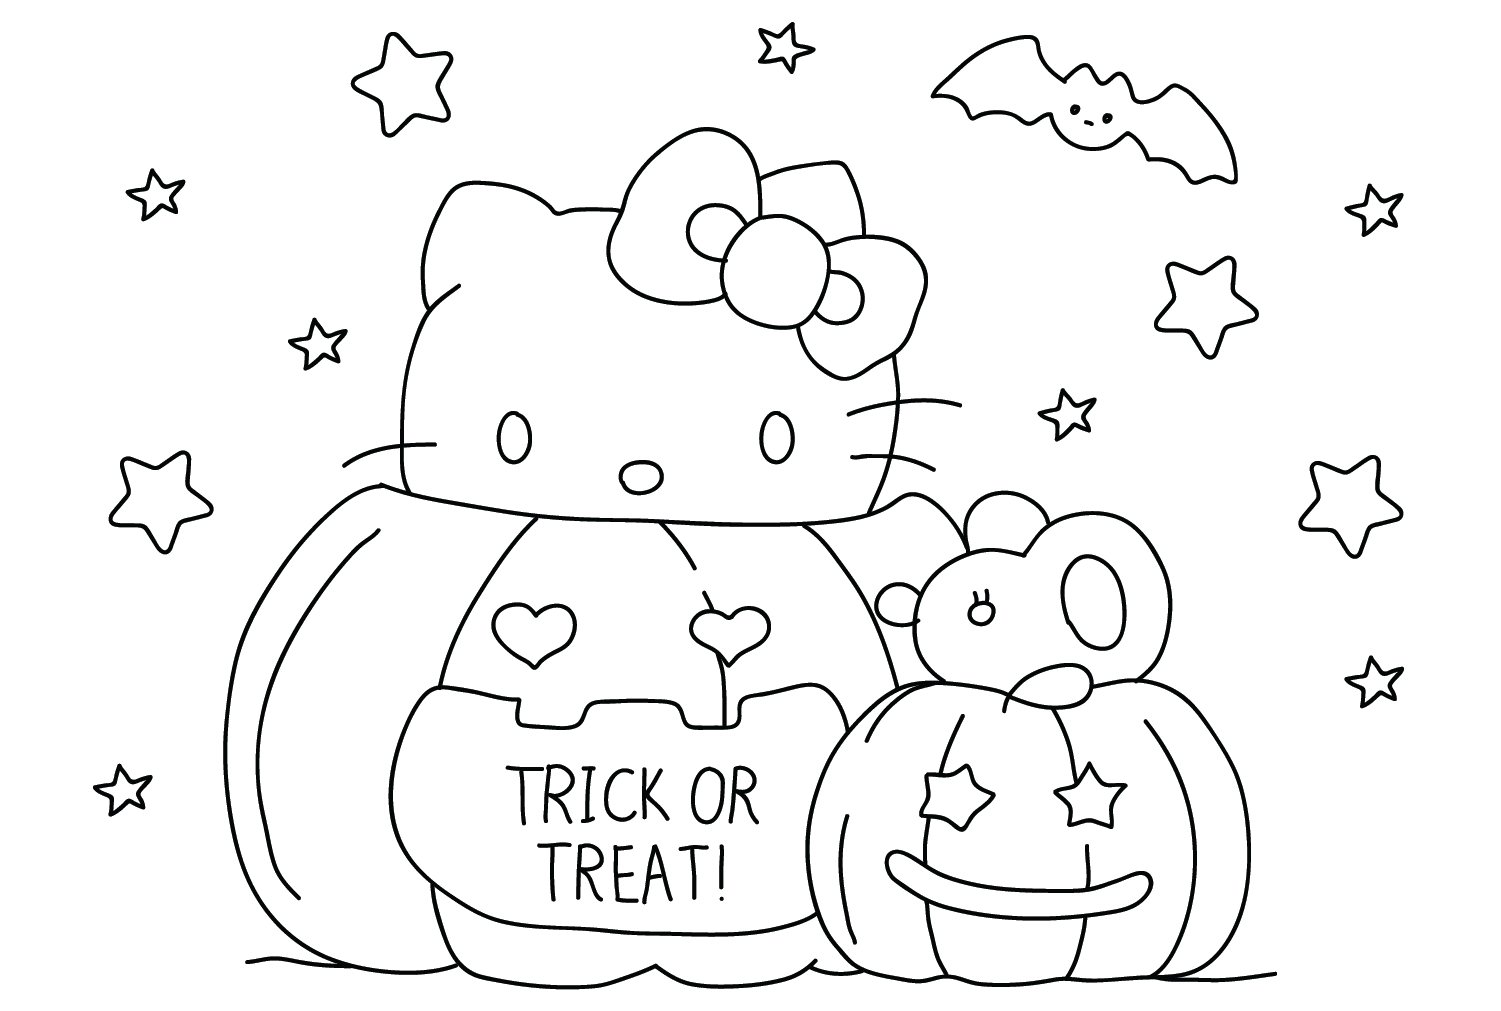 Halloween Hello Kitty Coloring Pages to for Kids from Halloween Hello Kitty